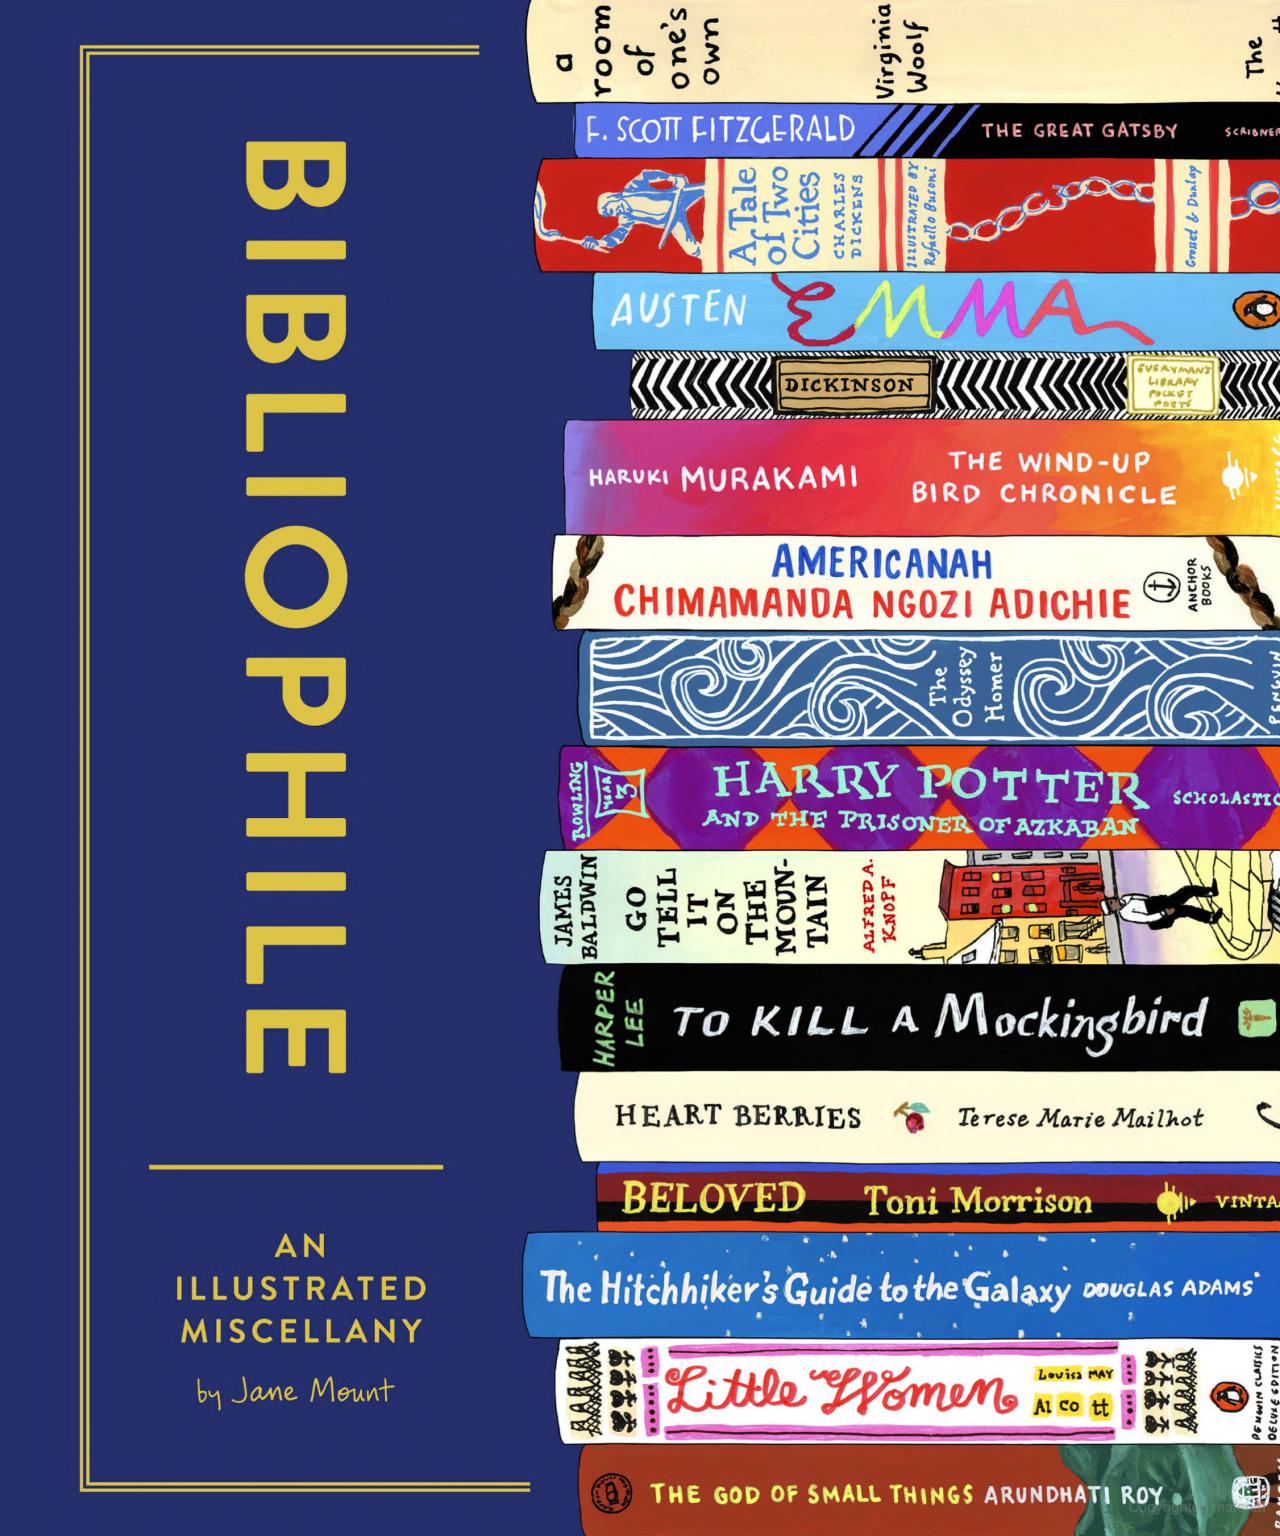 image for "Bibliophile: An Illustrated Miscellany"